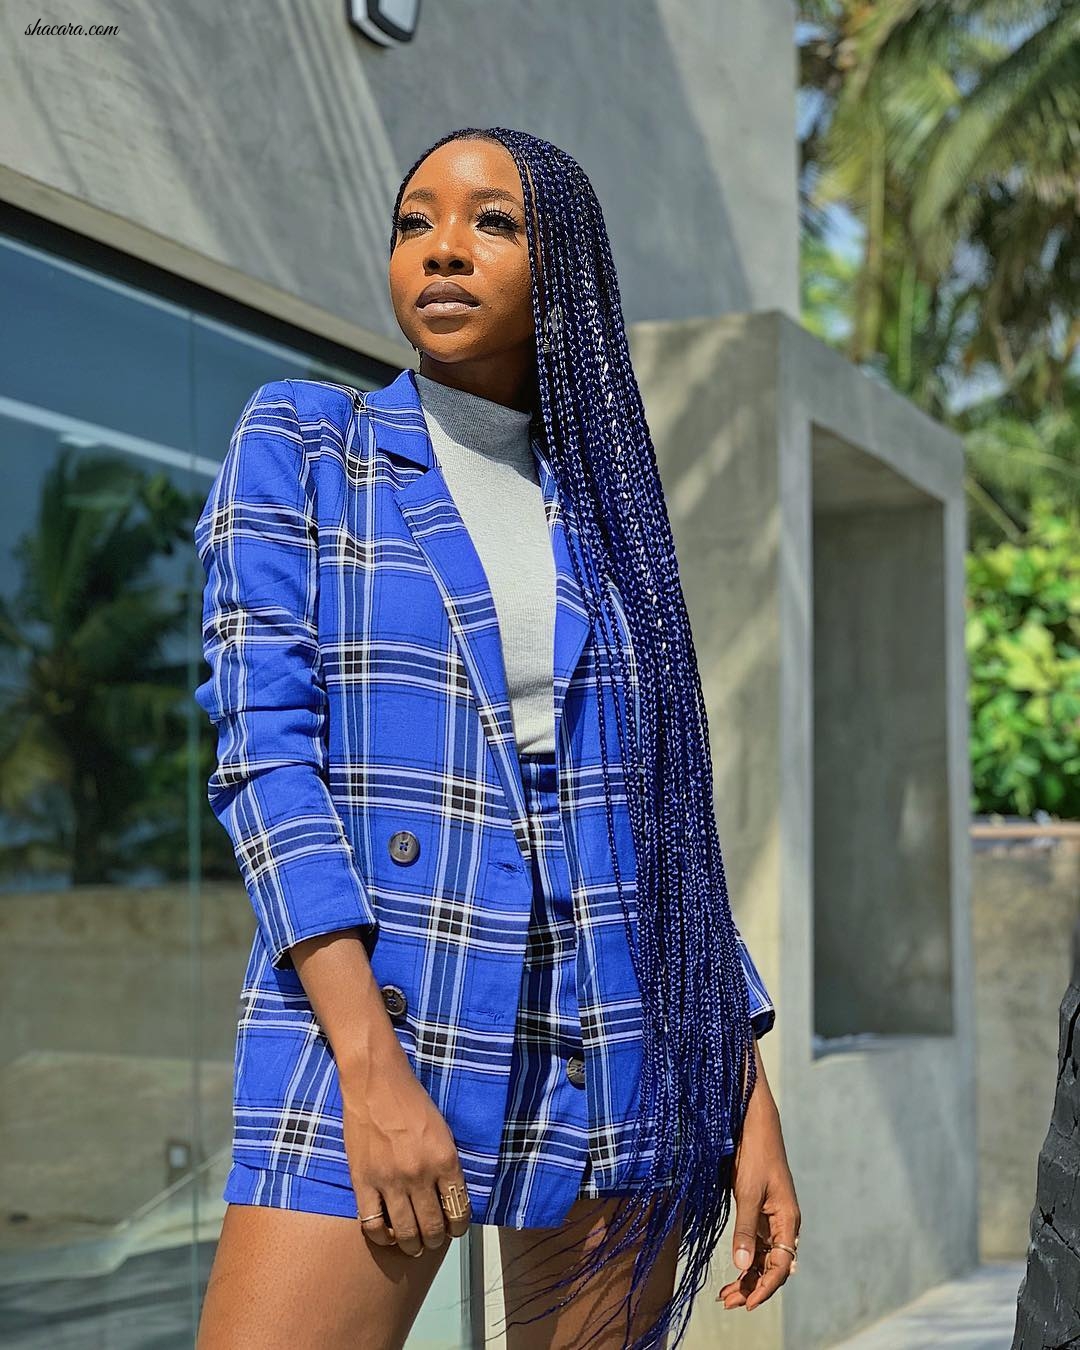 Ini Dima-Okojie Is A Sight For Sore Eyes In This Electric Blue Plaid Look